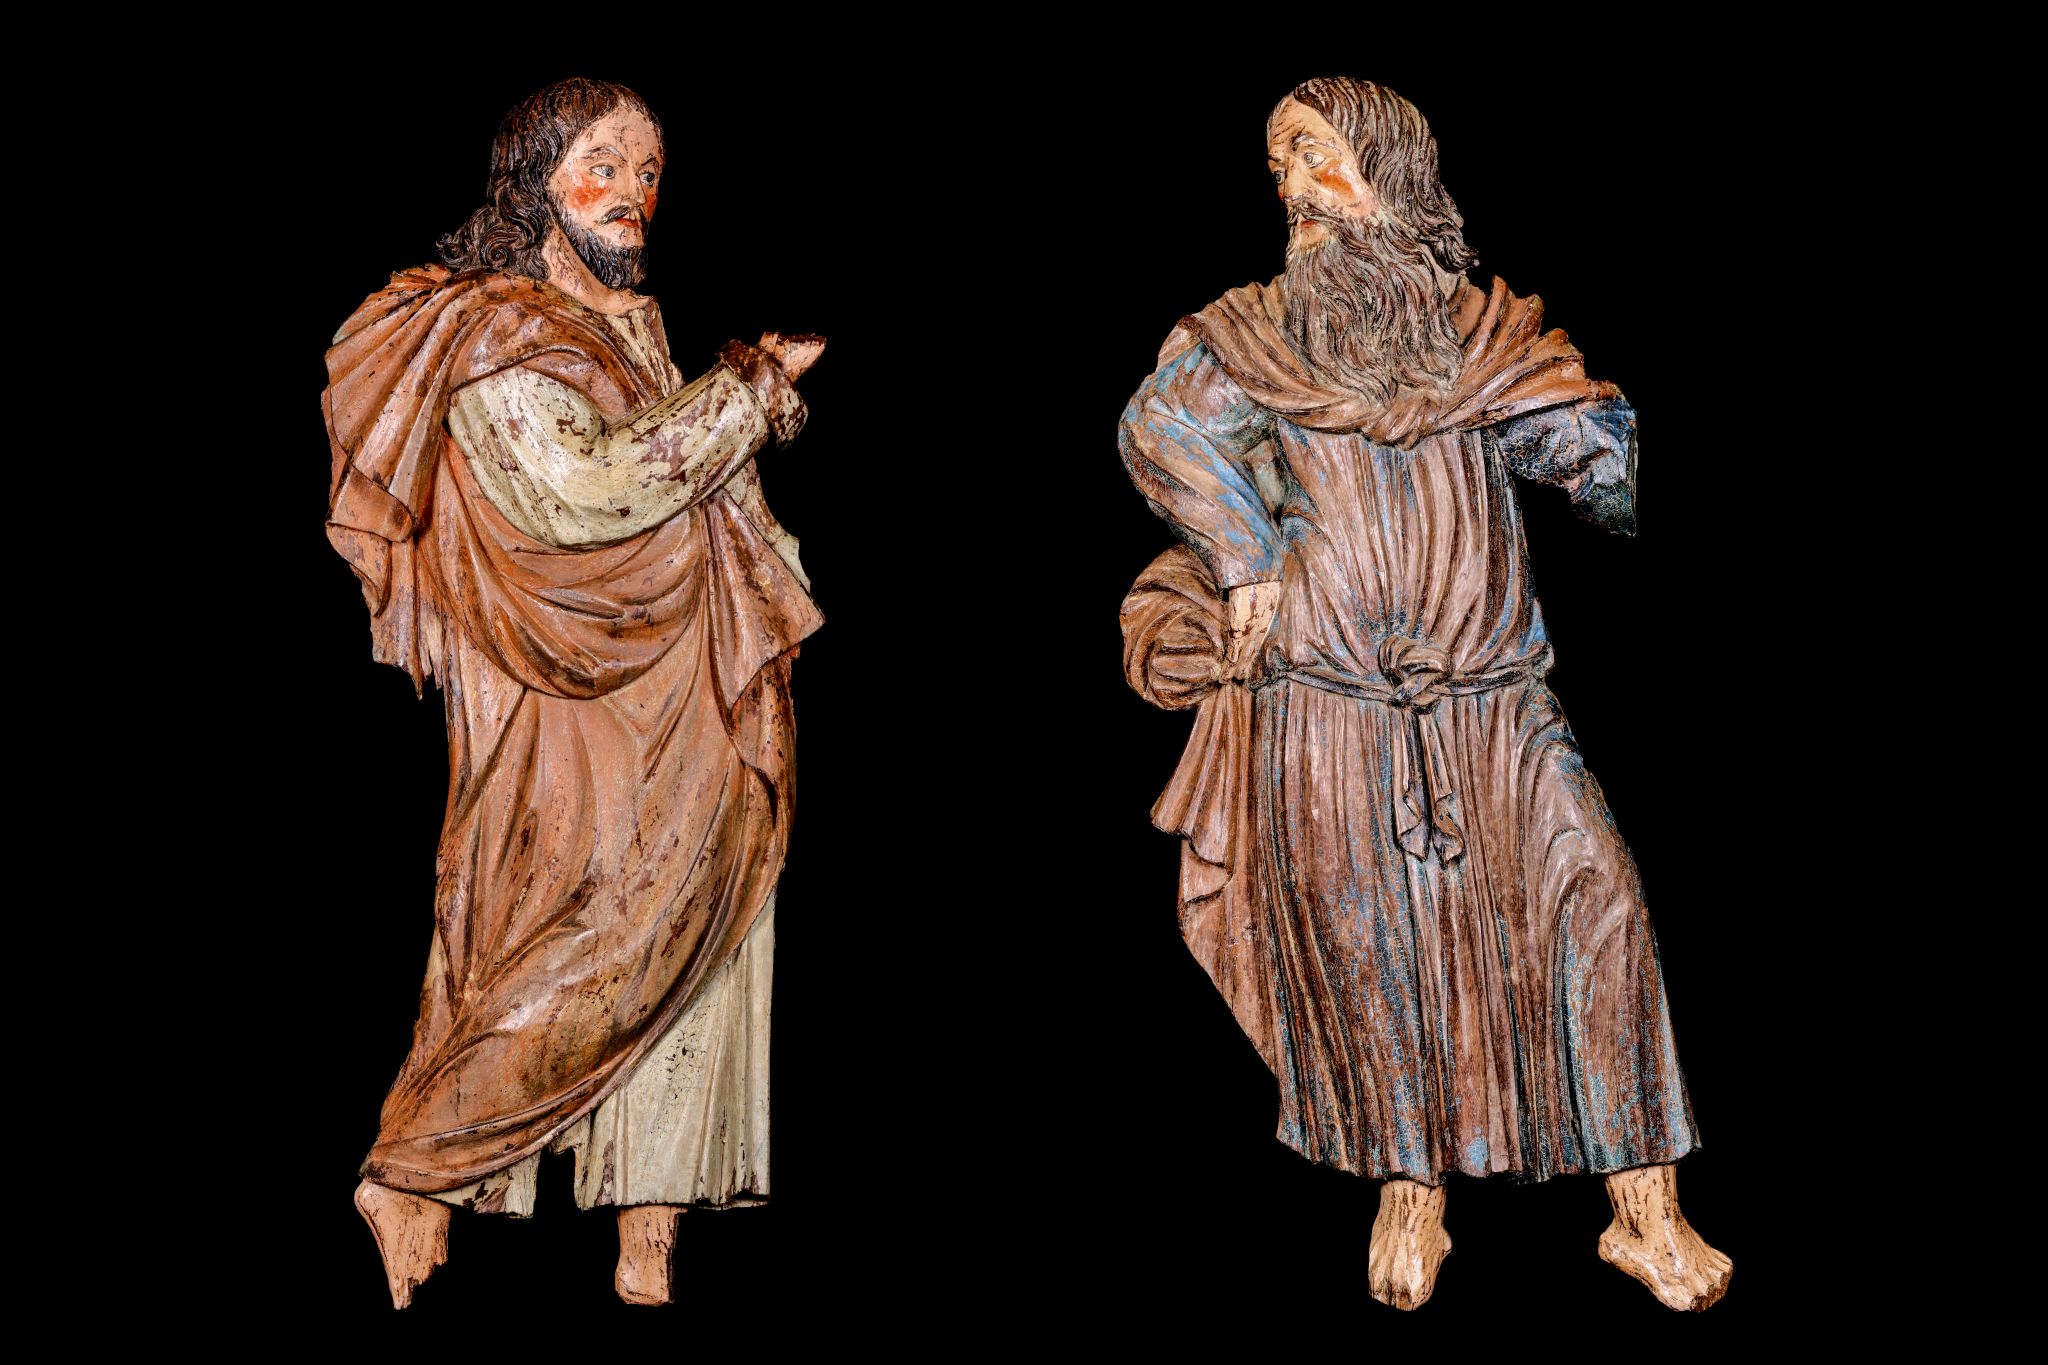 A LARGE PAIR OF 16TH CENTURY SOUTH GERMAN CARVED WOOD AND POLYCHROME DECORATED RELIEFS OF SAINTS the